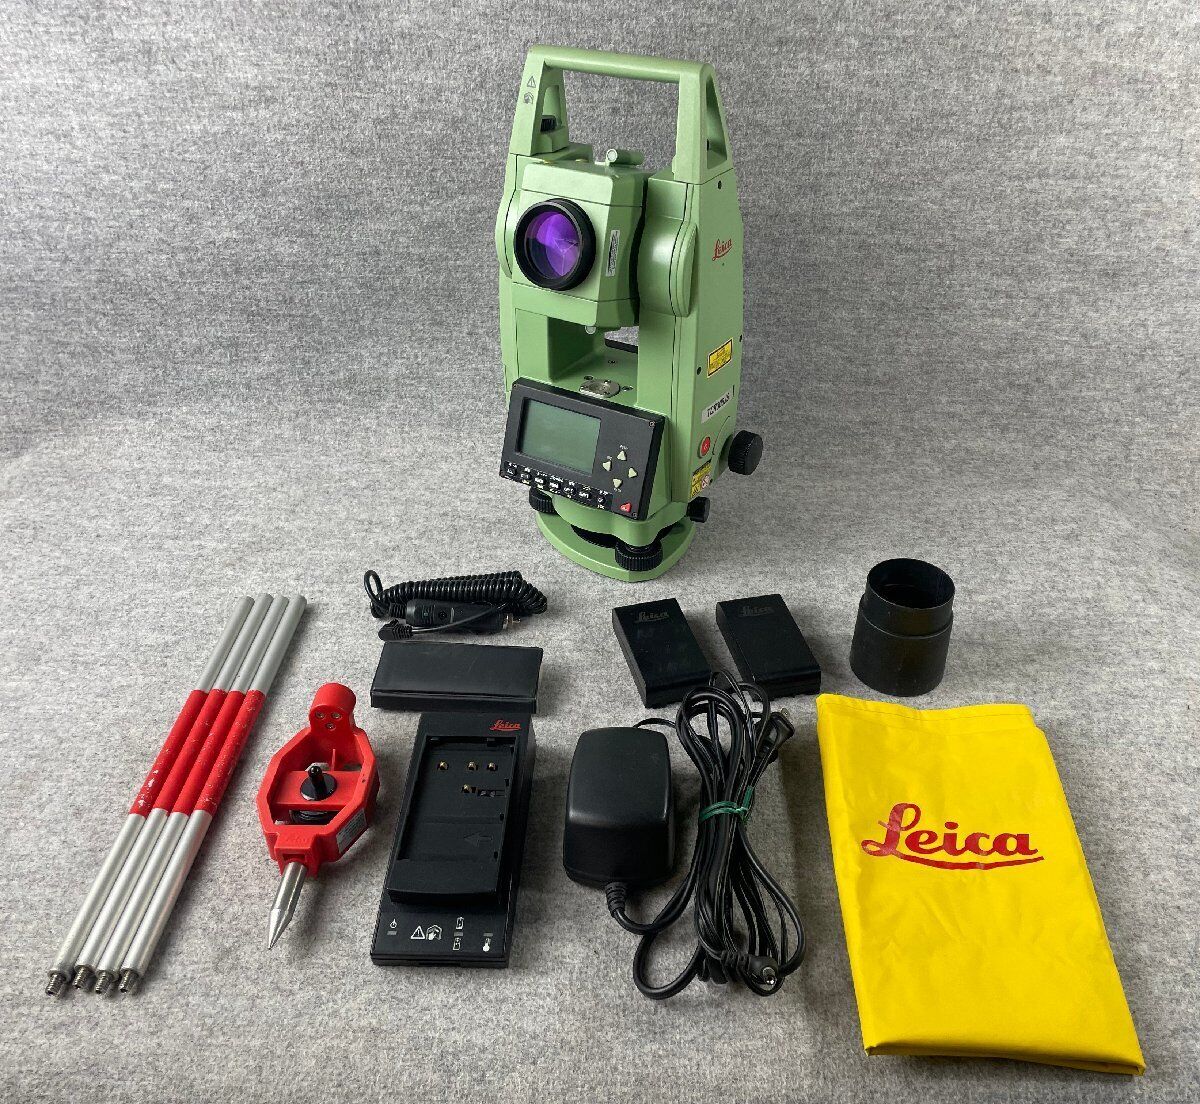 Leica TCR305 GeoSystems Survey Total Station Dual Display free＆fast ship from JP